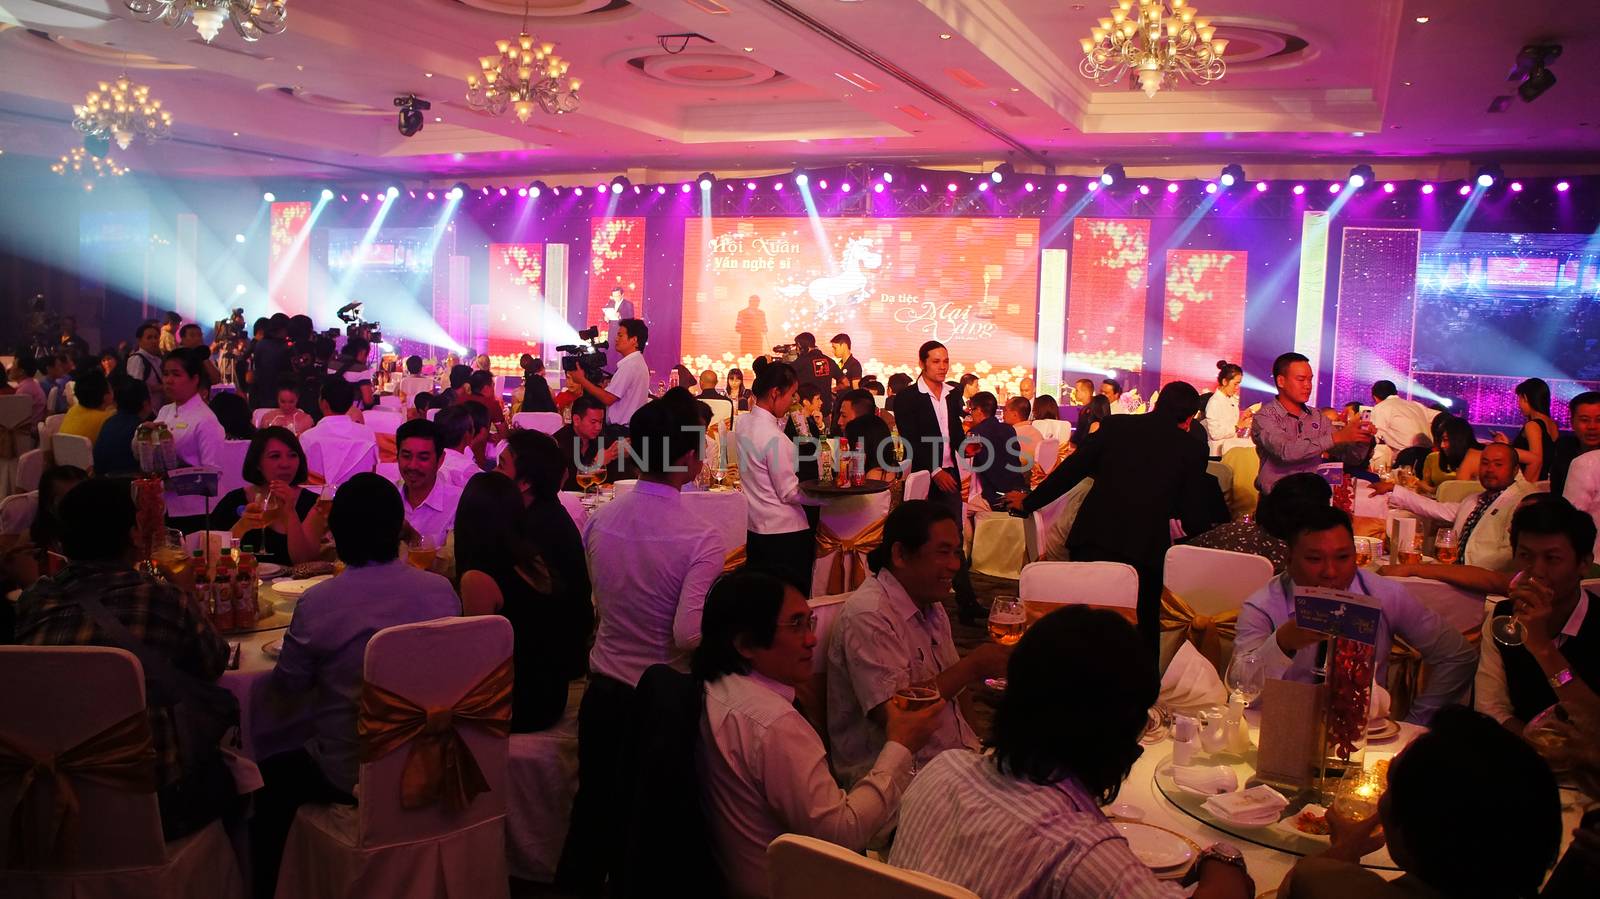 HO CHI MINH CITY, VIET NAM- JAN 15:Vietnamese artists world enjoy a year end party, colorful stage, famous people drinking and have dinner with happiness, cheerful with frieds in Vietnam, Jan 15, 2013